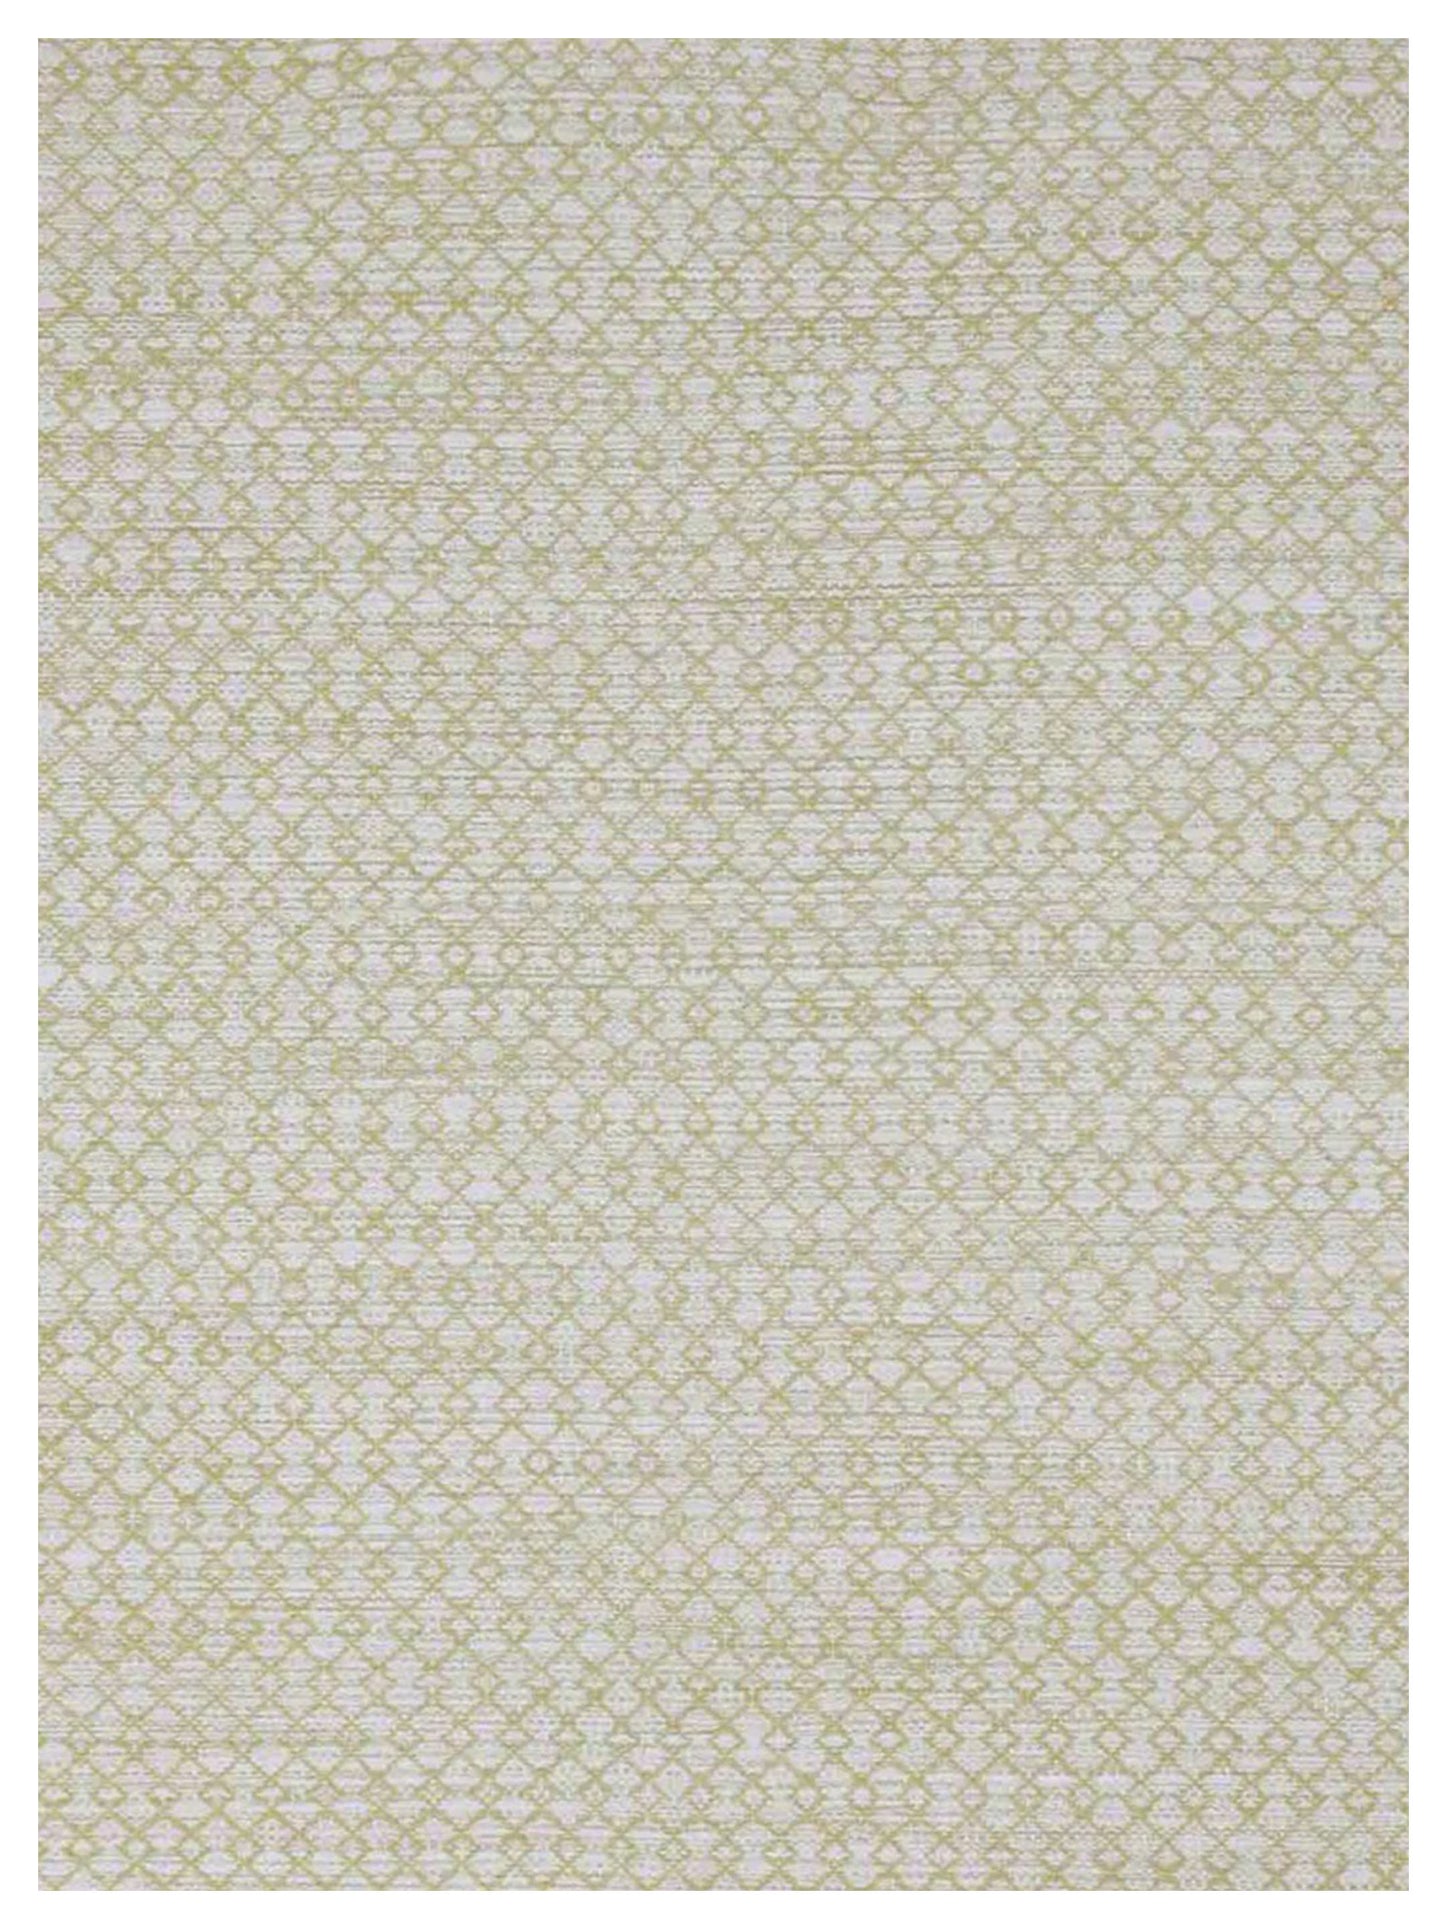 Limited Classic CL-103 Yellow  Transitional Woven Rug